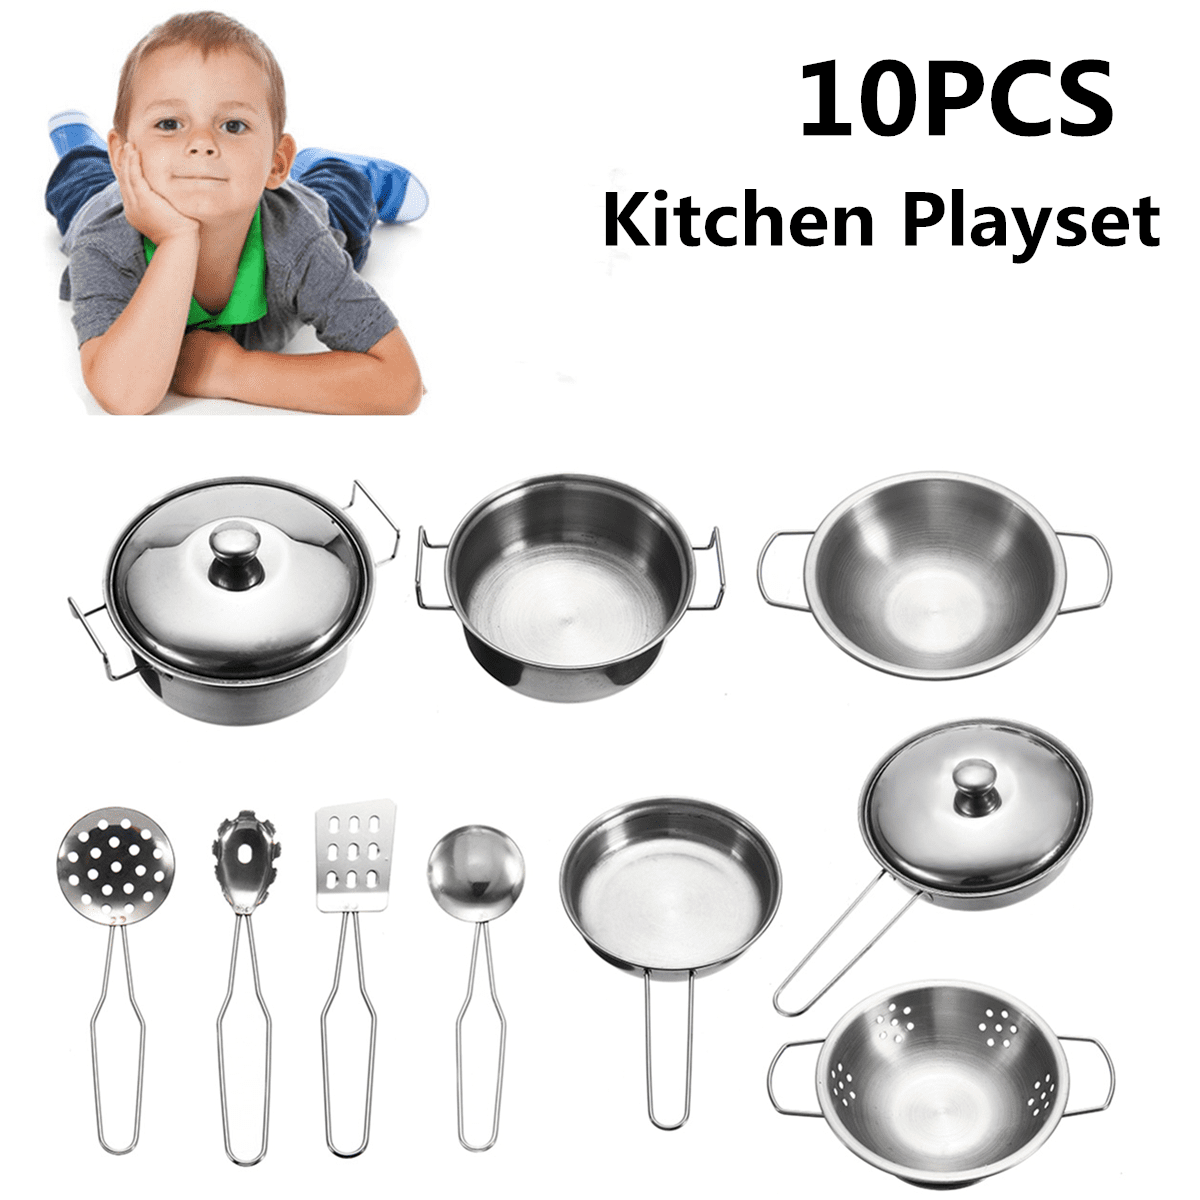 Children's Quality Coloured Toy Stainless Steel Kitchen Set Pots Pans  and Acces 